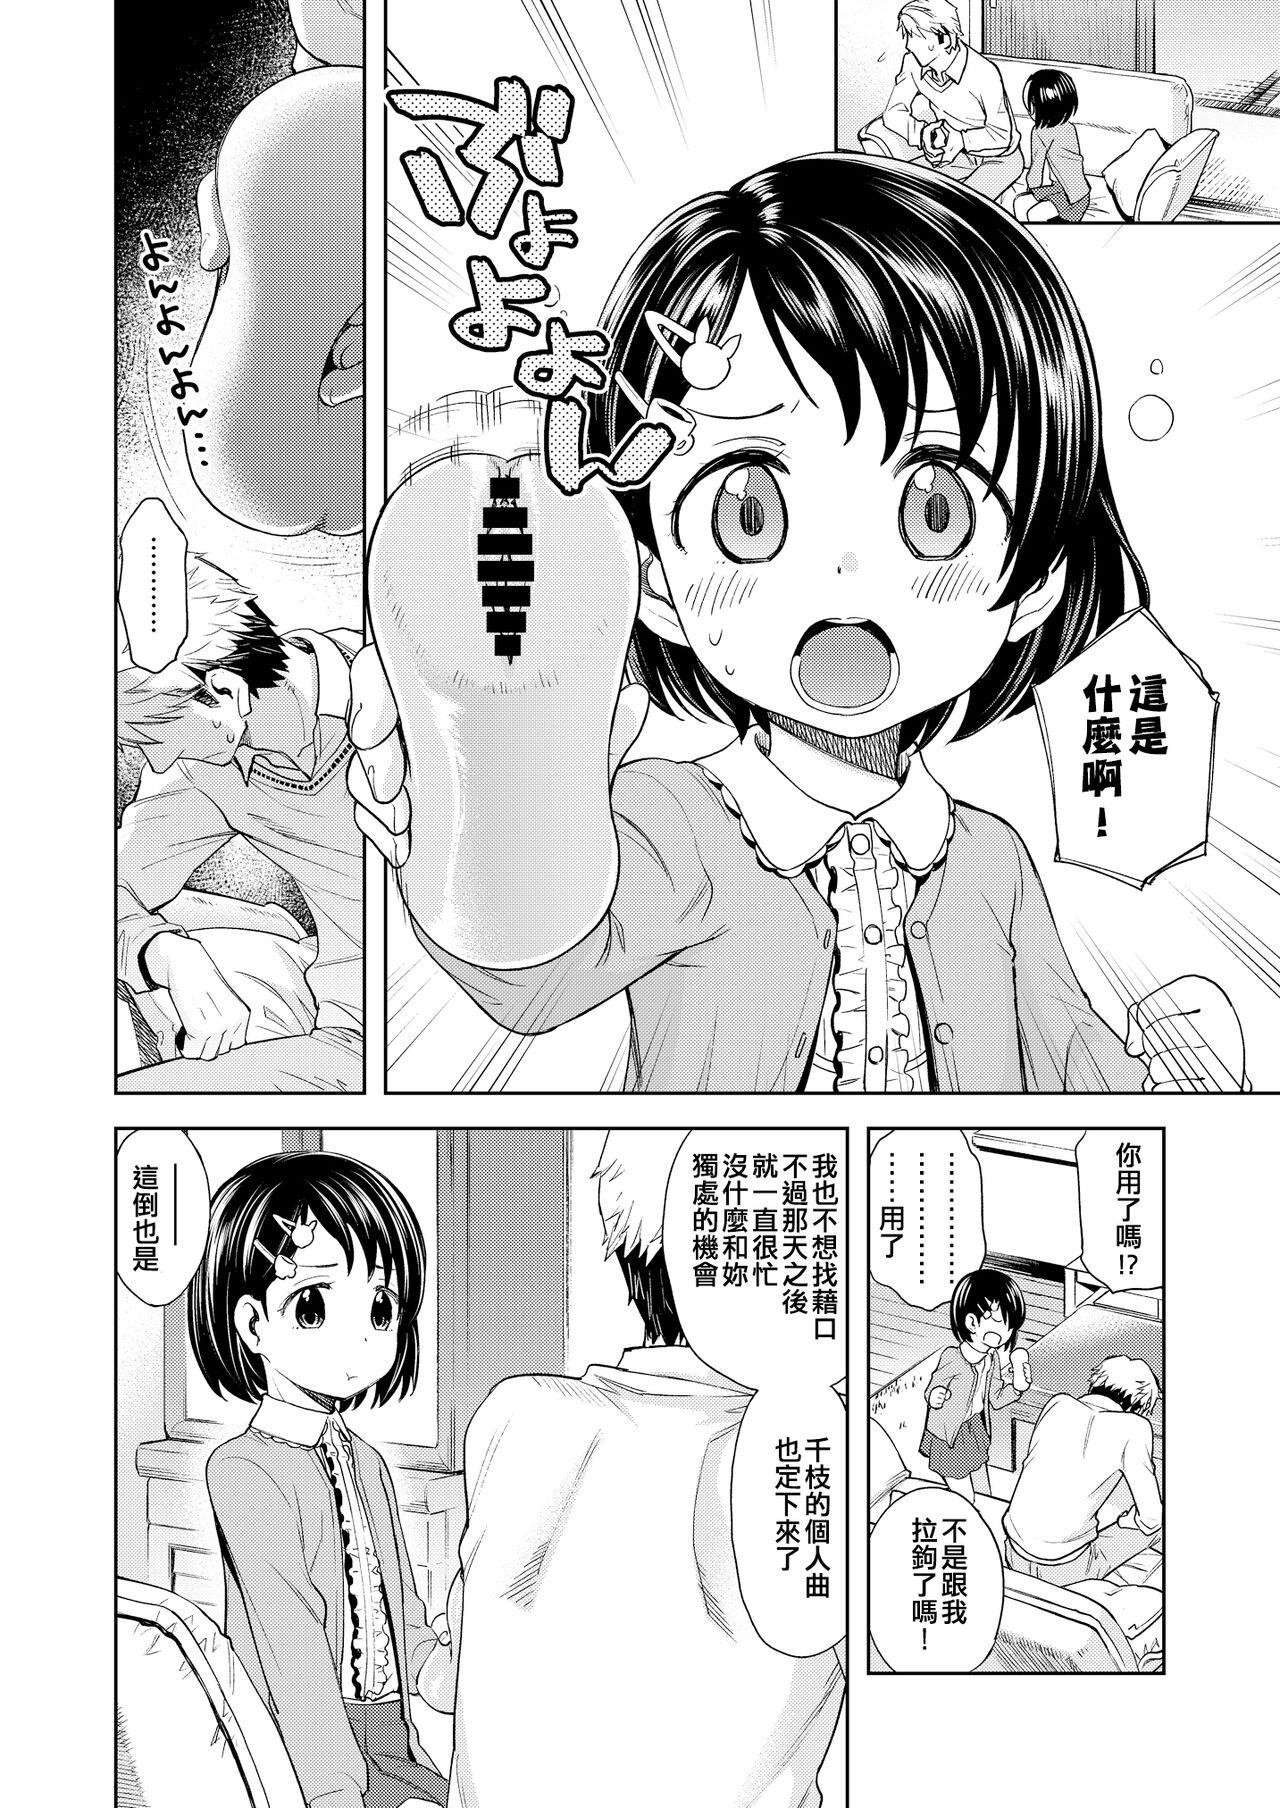 Home Warui Ko Chie-chan 3 - The idolmaster Party - Page 6